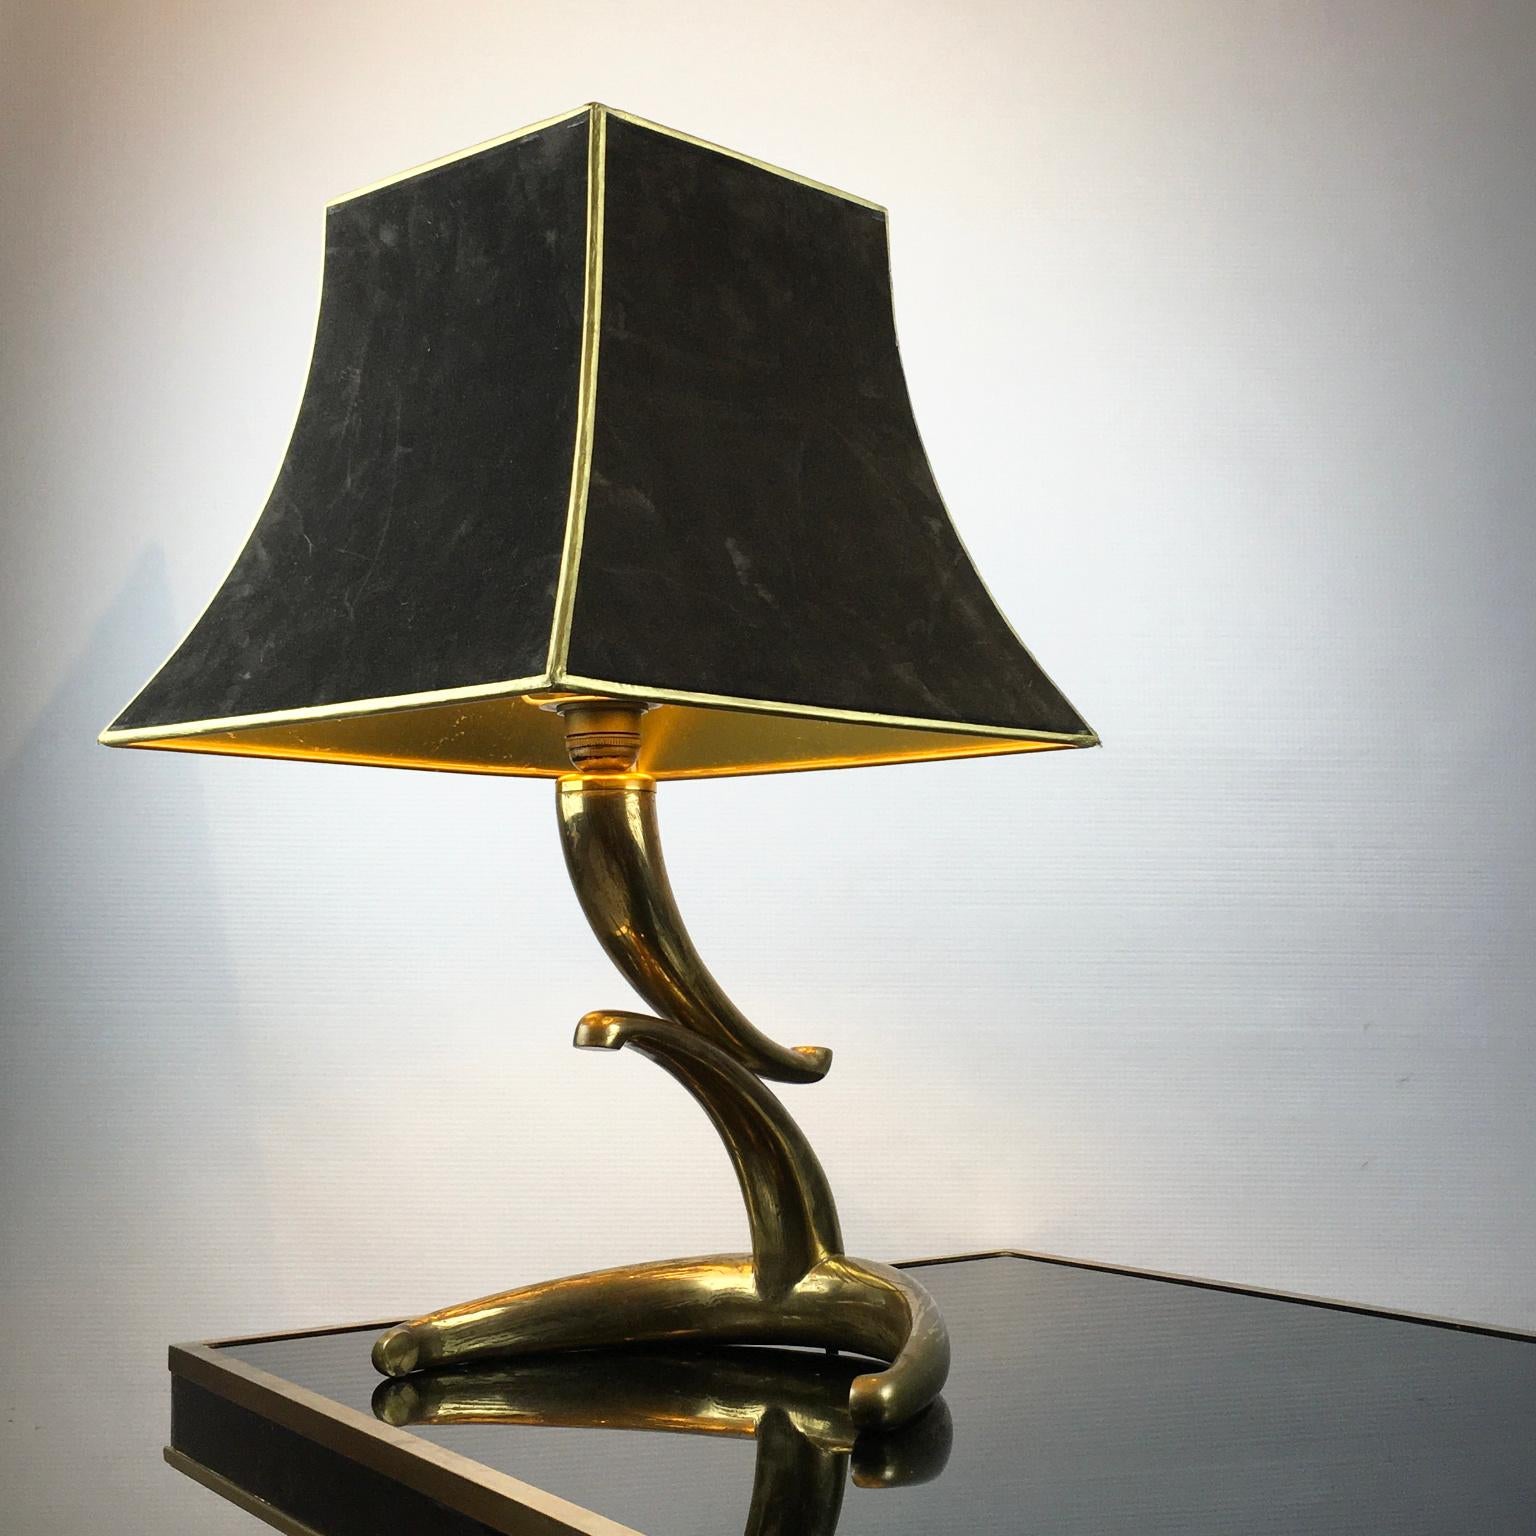 1970s Table Lamp in Solid Brass Horns Shape with Velvet Lampshade, France For Sale 4